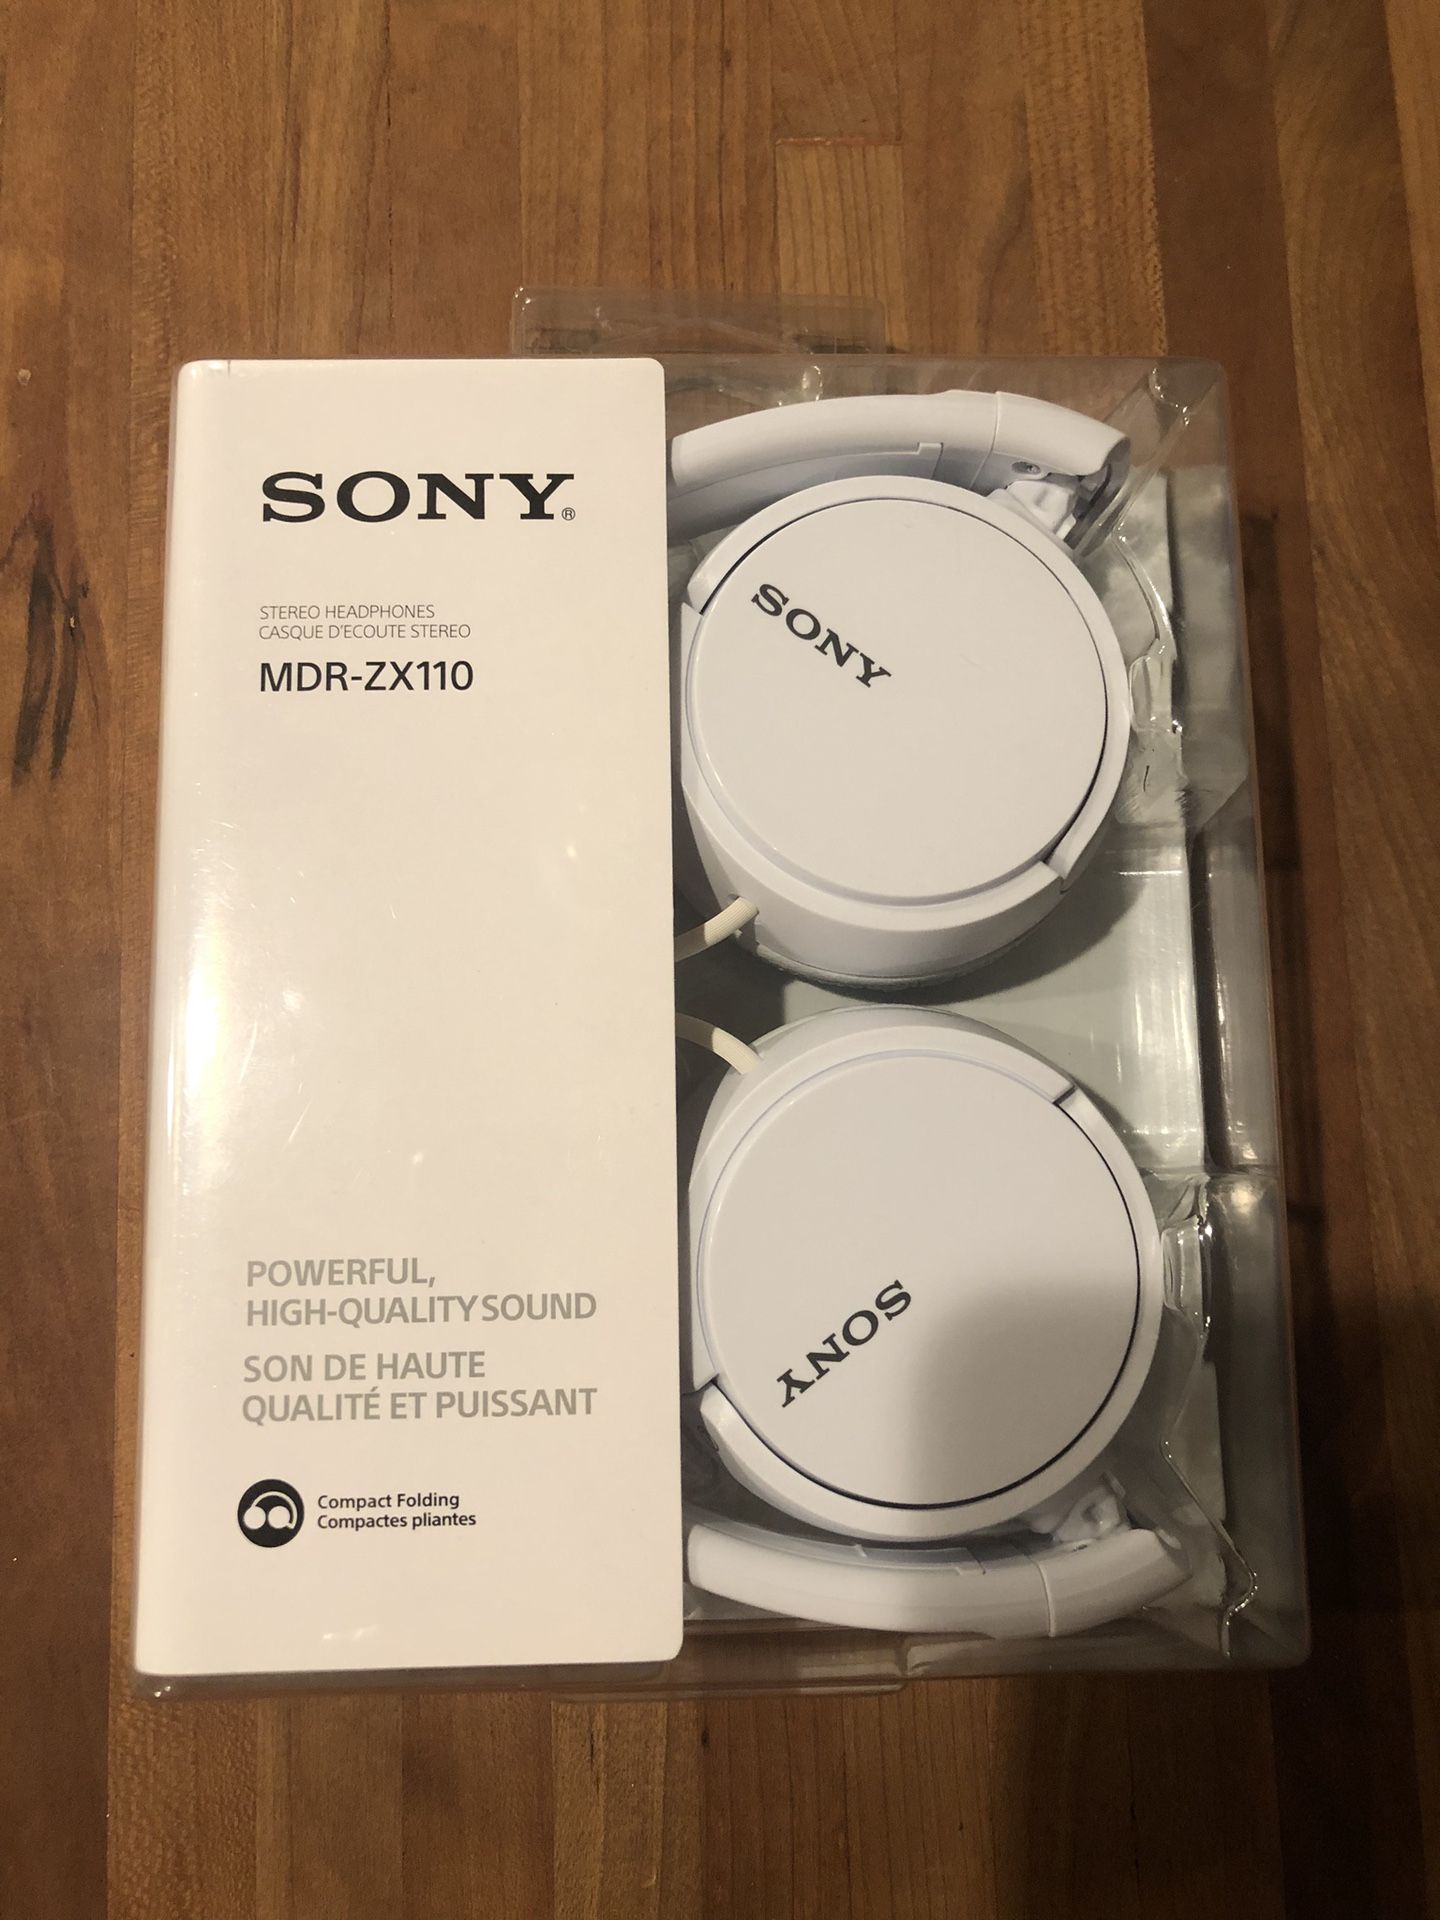 Sony White Stereo Headphones MDR-ZX110 Sealed Box